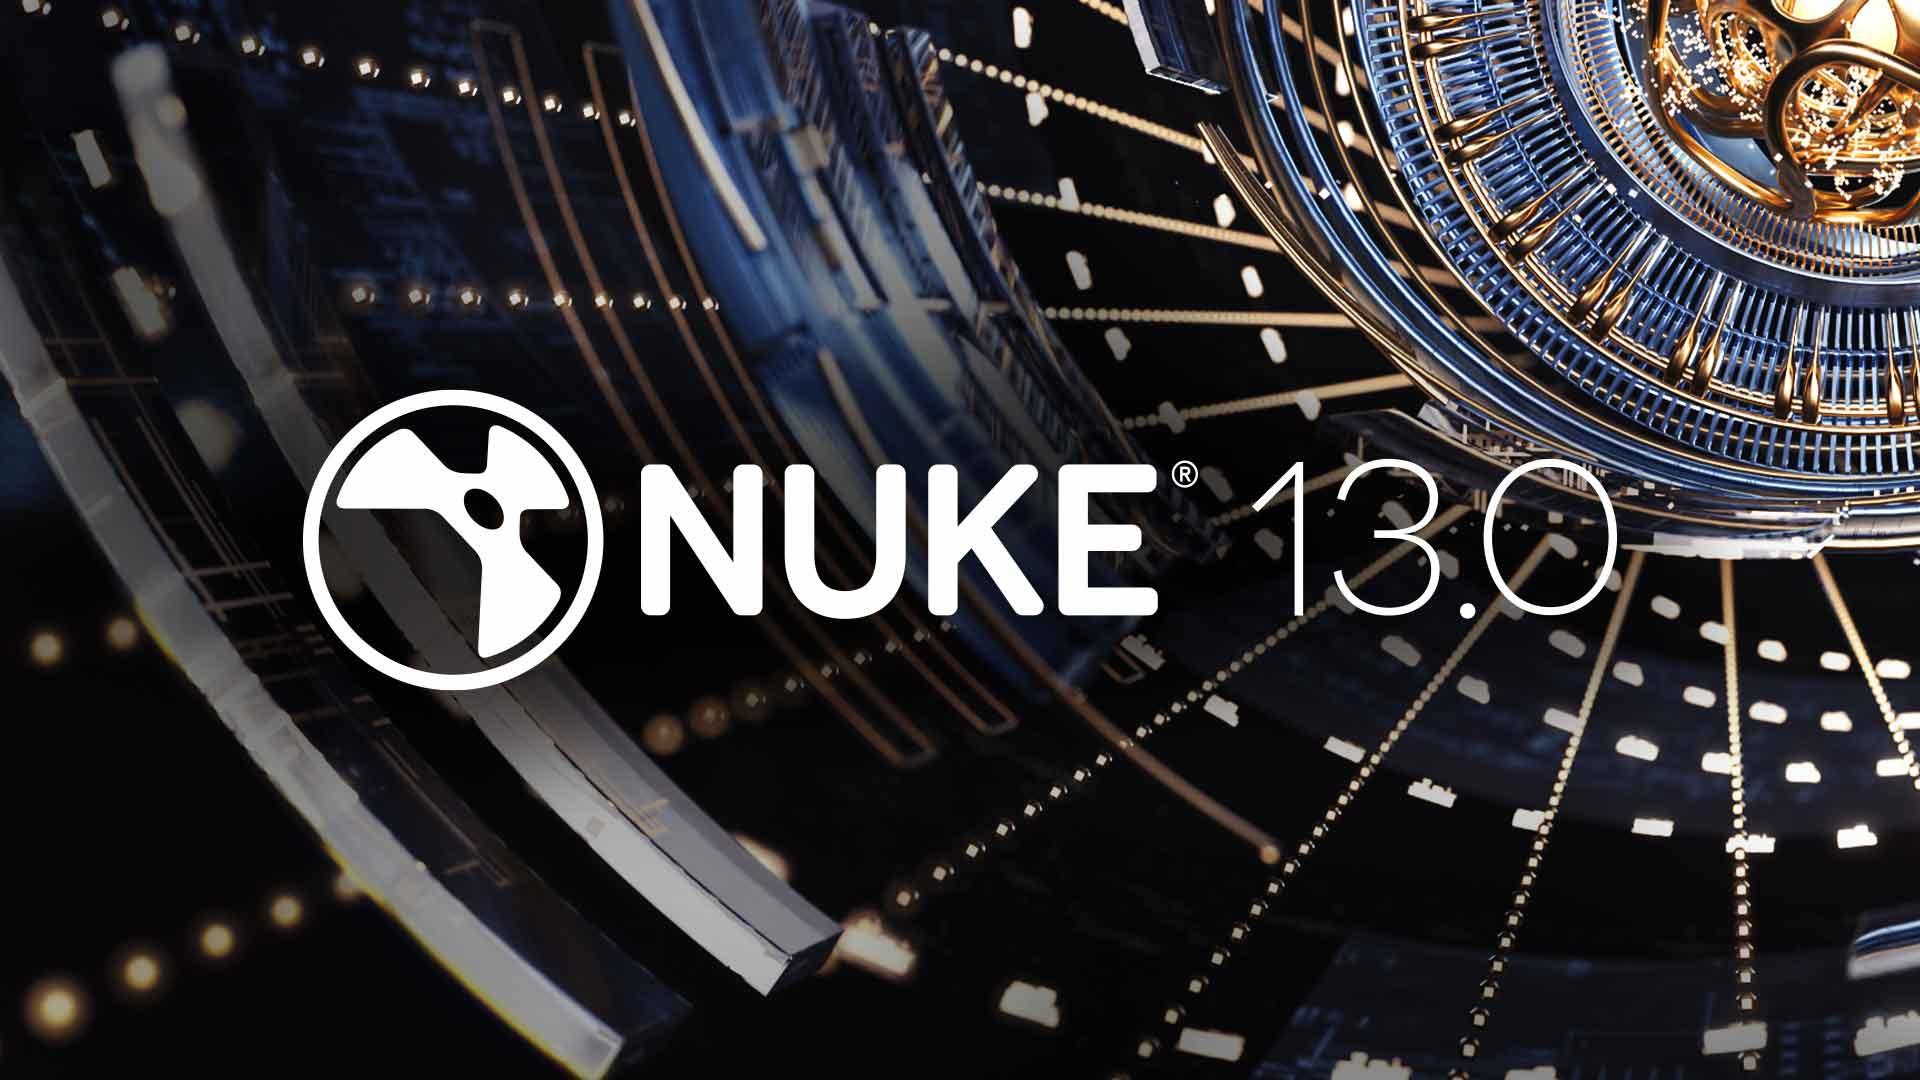 Nuke 13.0 is out